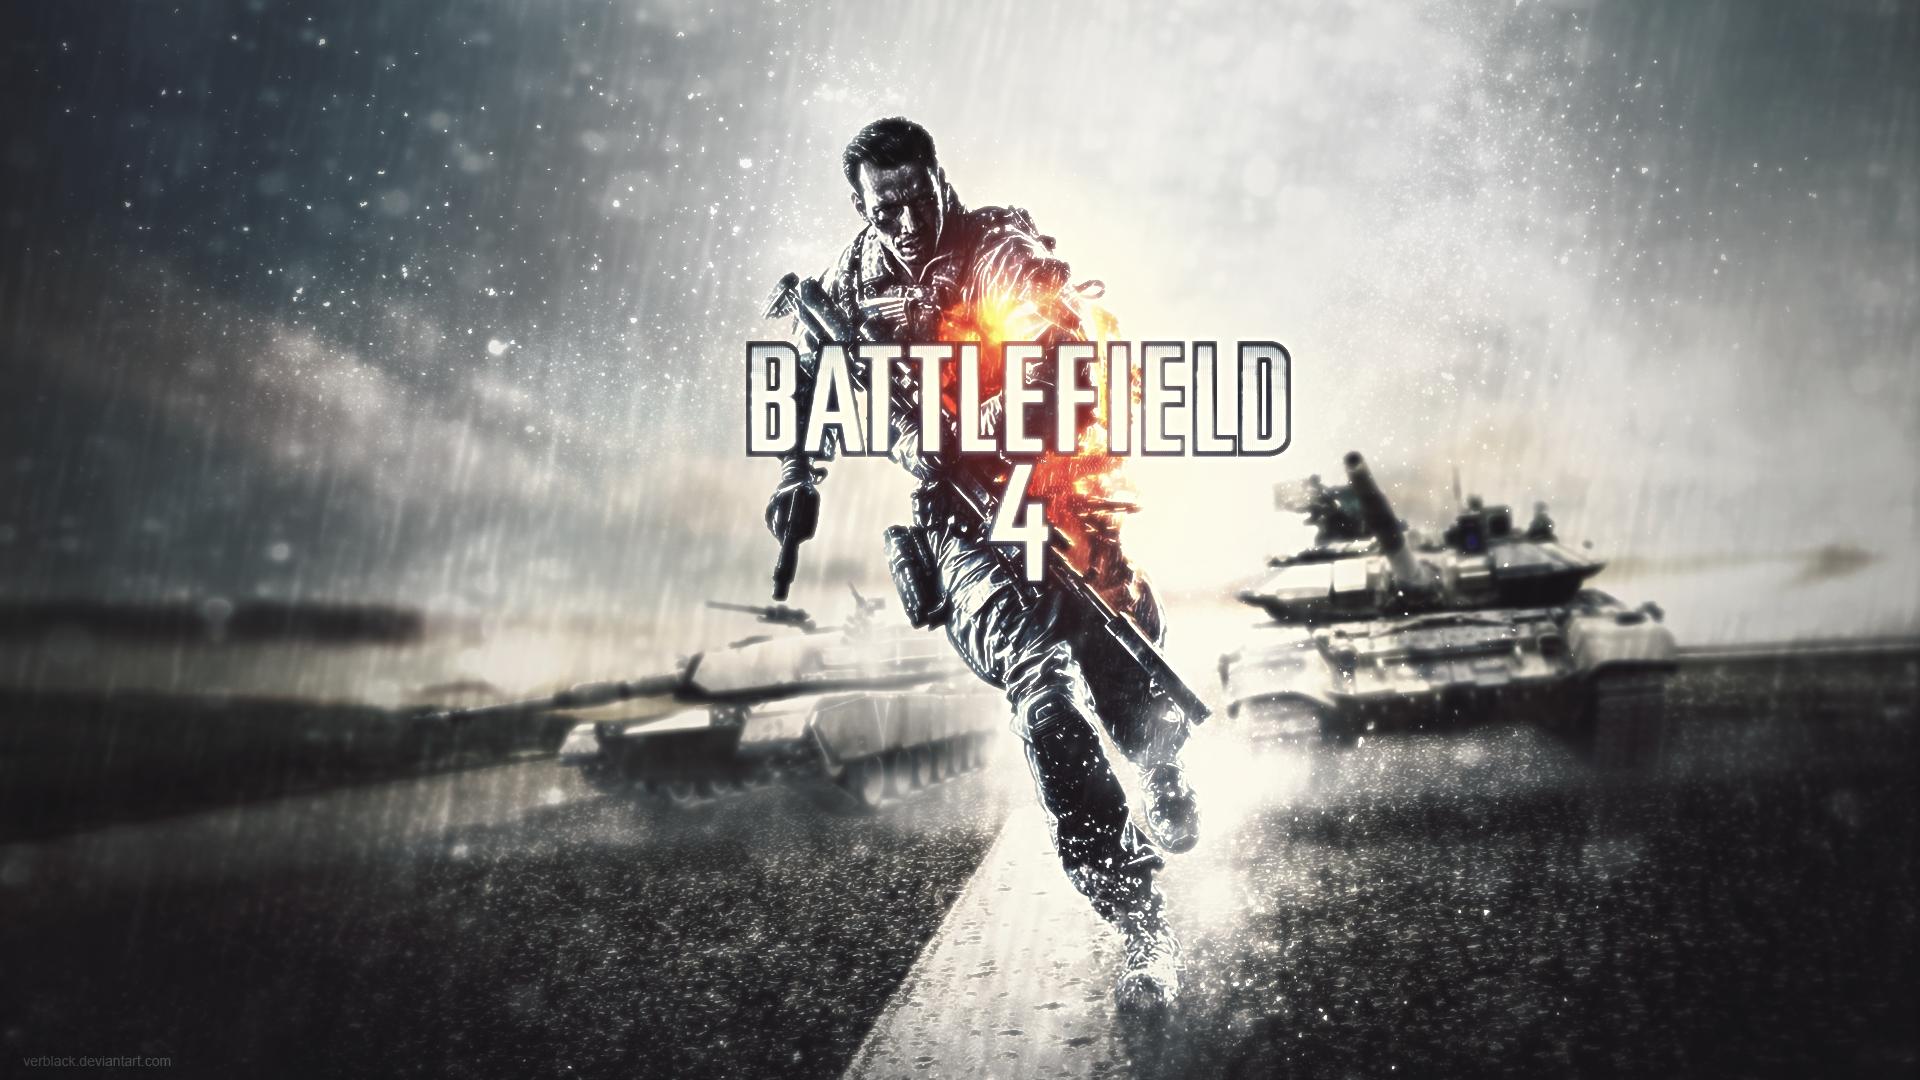 General 1920x1080 Battlefield 4 video games PC gaming DeviantArt video game art video game men